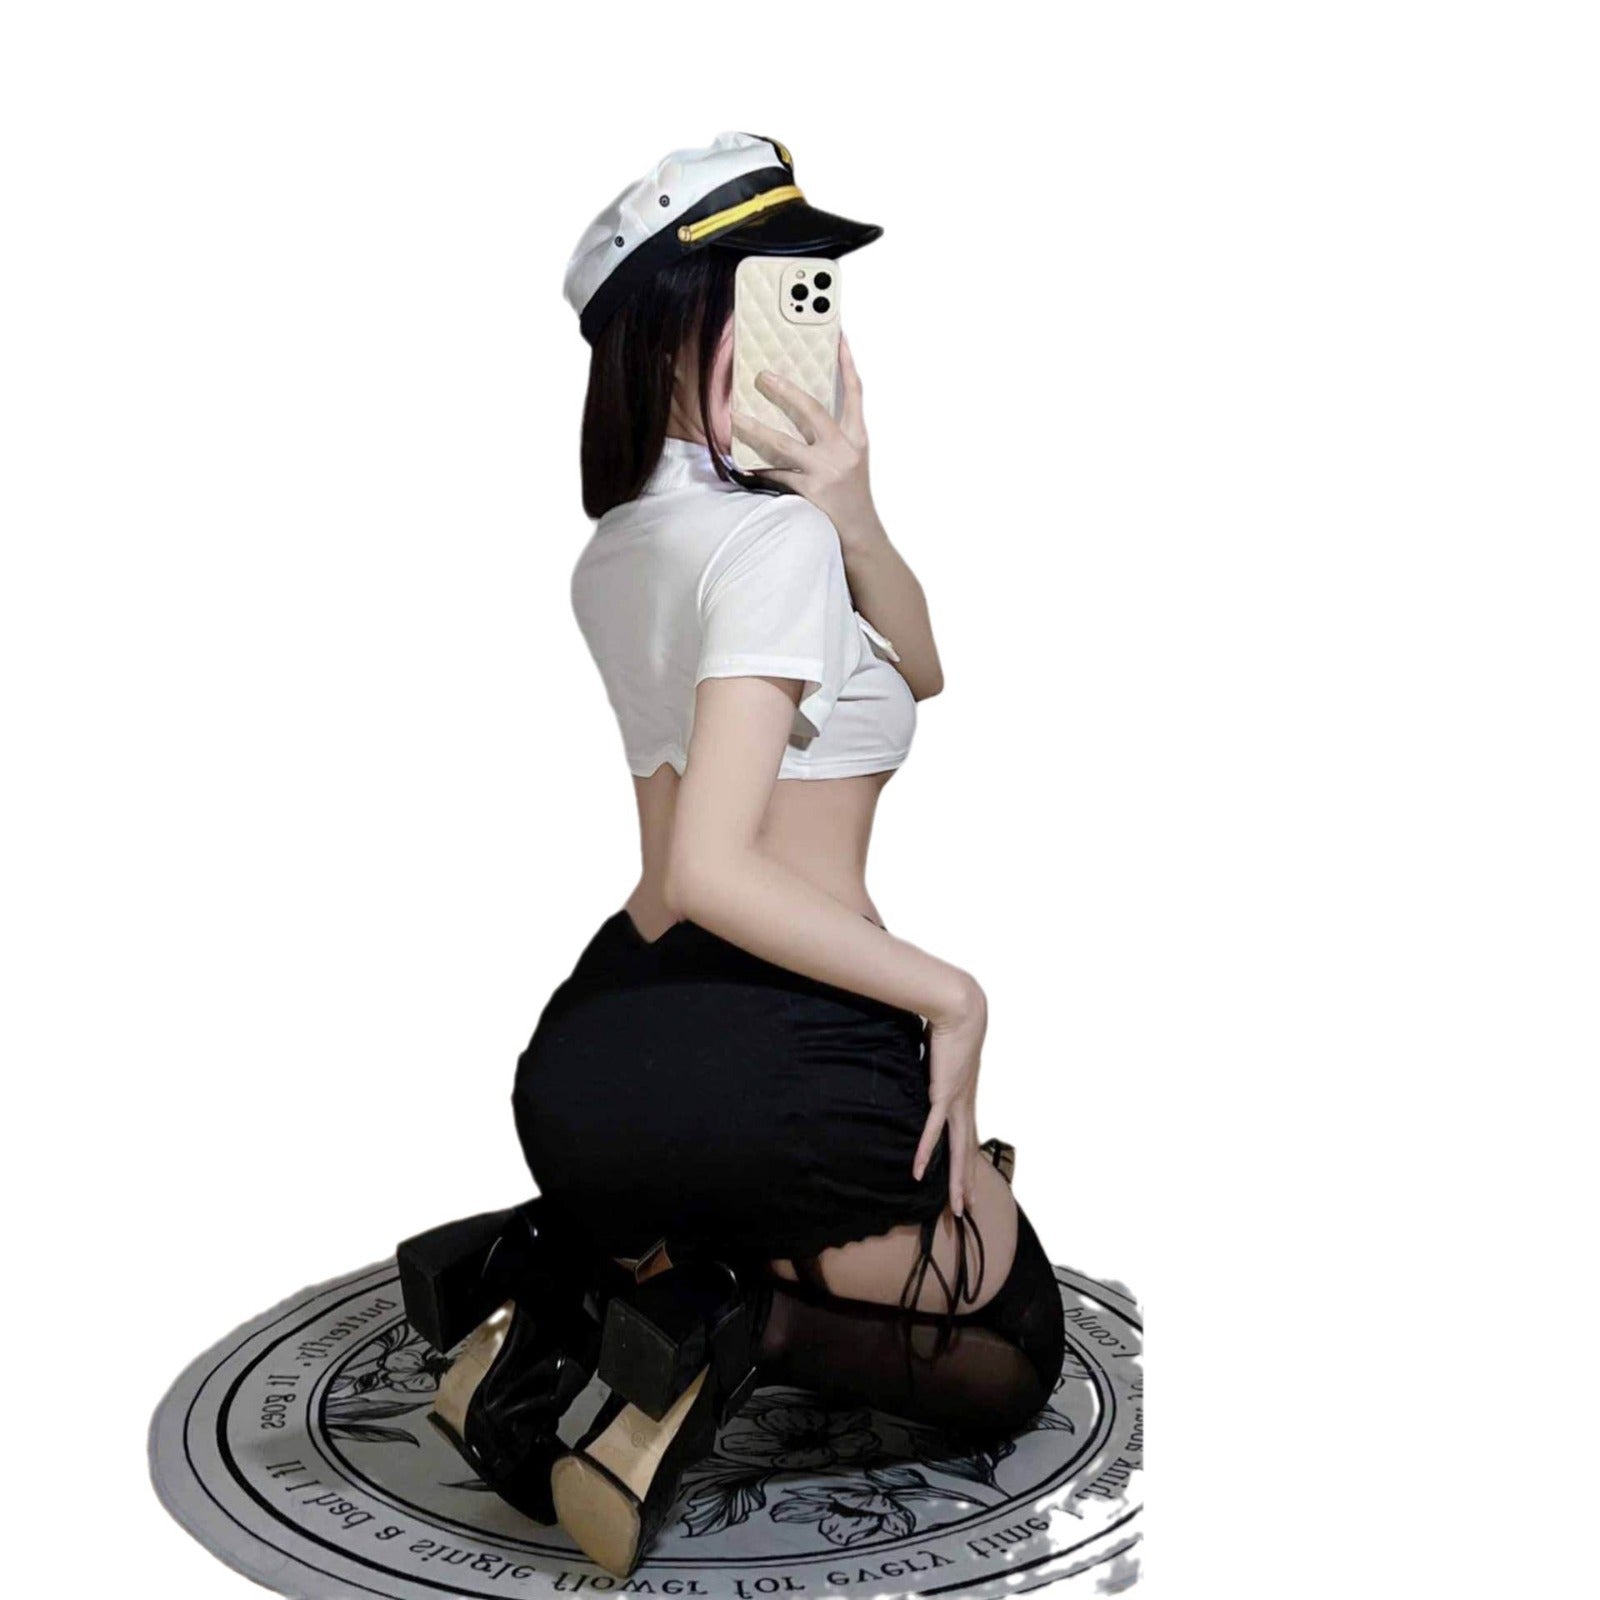 Shelby Pilot Roleplay Lingerie Set With Stocking, Hat And Tie - Sinderella